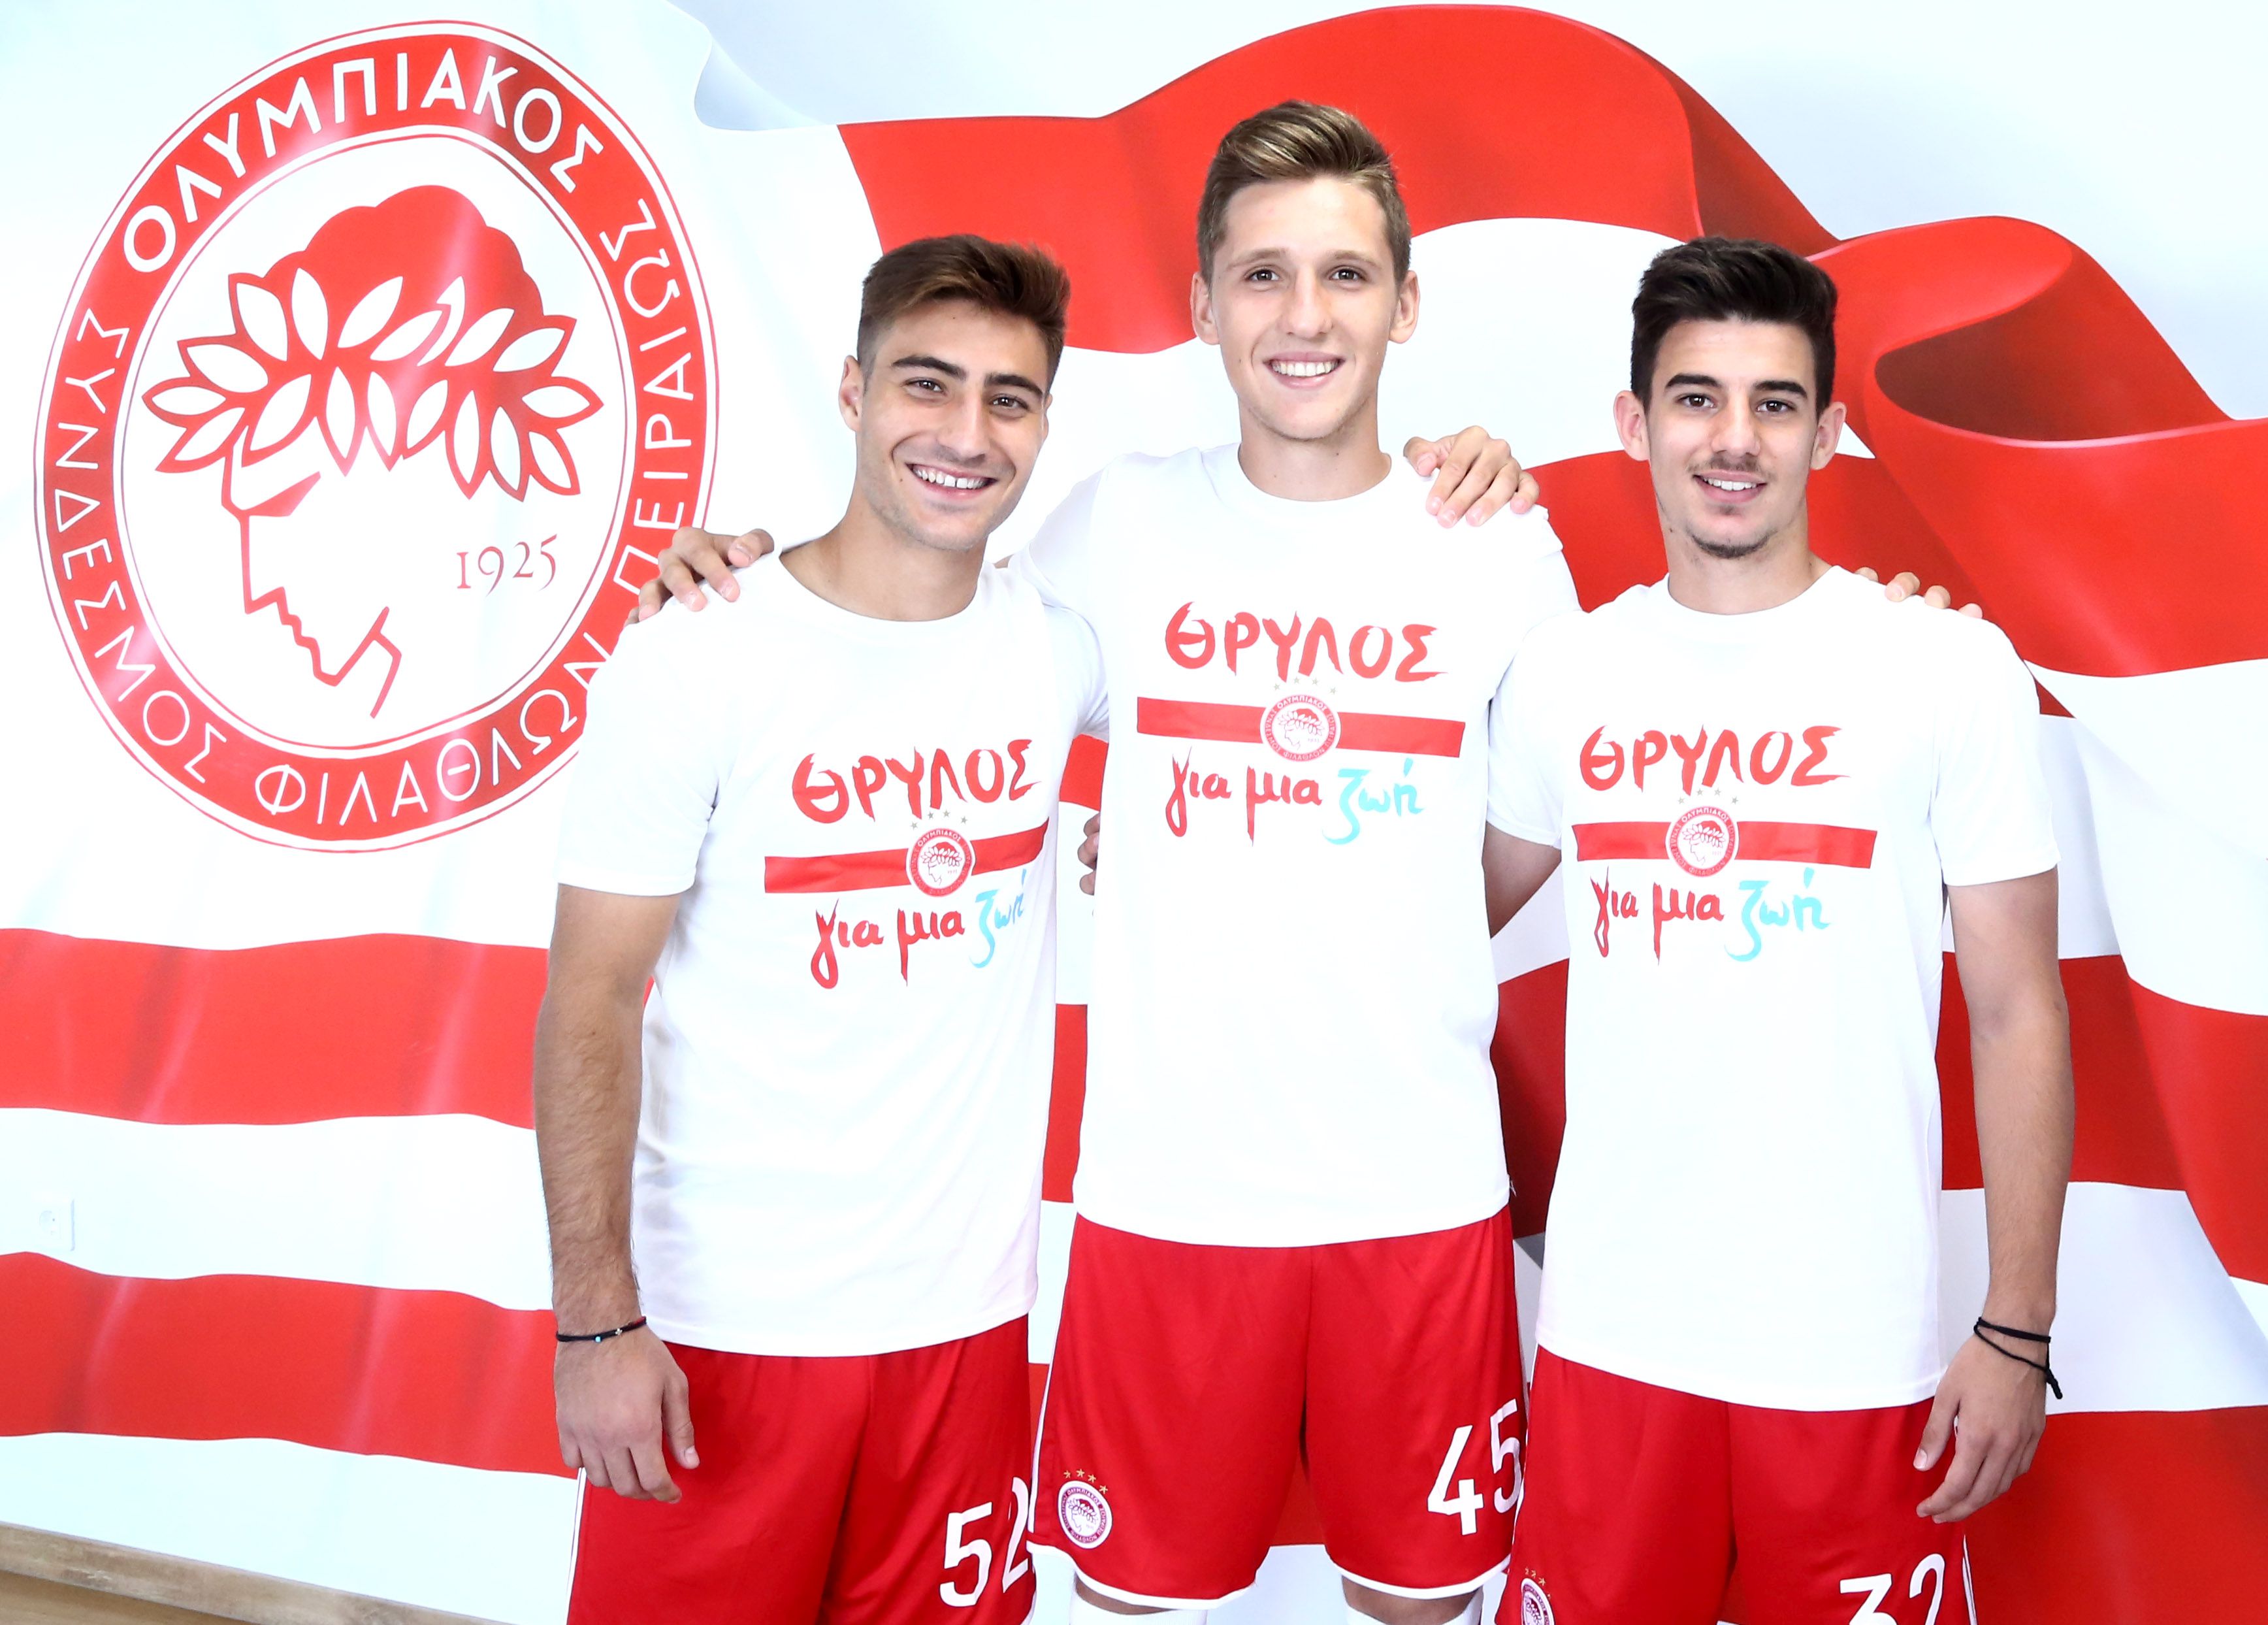 We are “Olympiacos for life”!